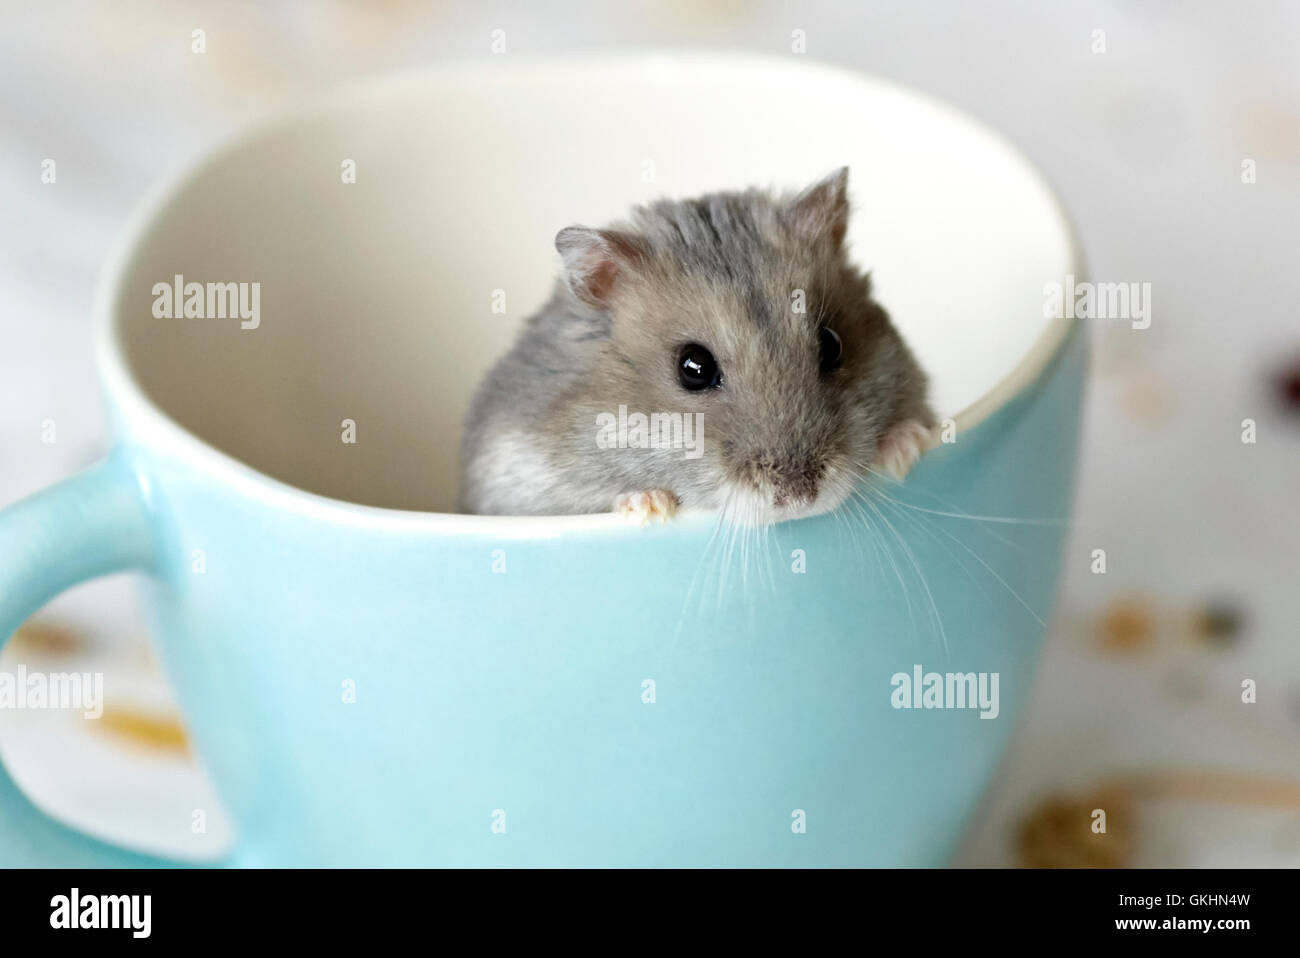 Dwarf Russian Hamster in a teacup Stock Photo